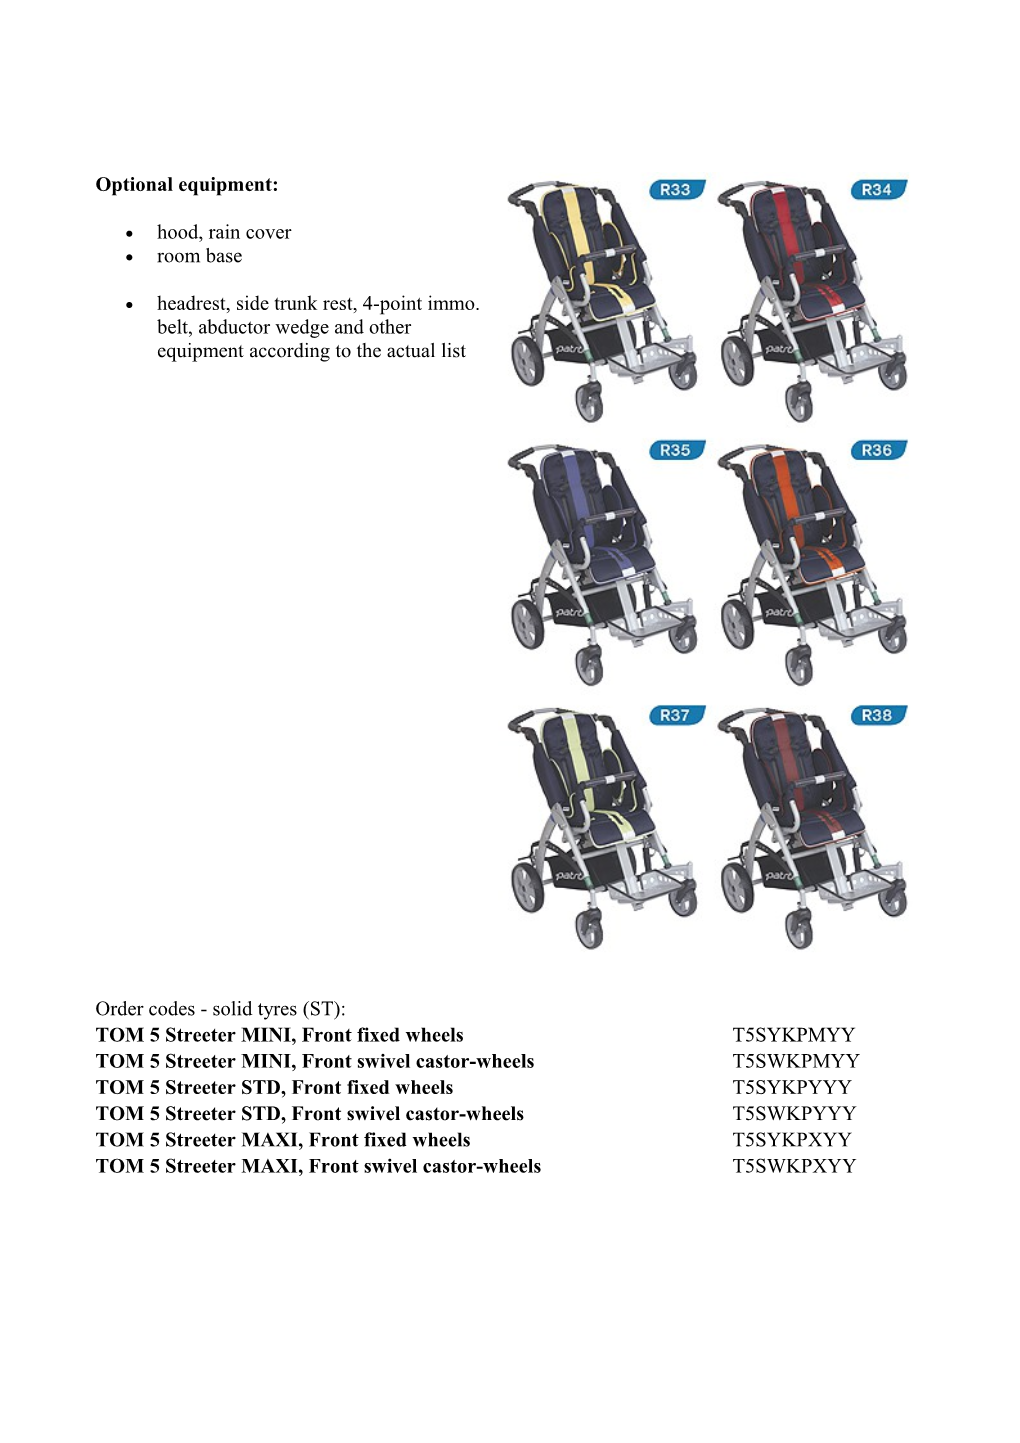 Brand New 100% ALUX Spring-Cushioned Chassis and Brand New 100% ALUX Fully Position Adjustable